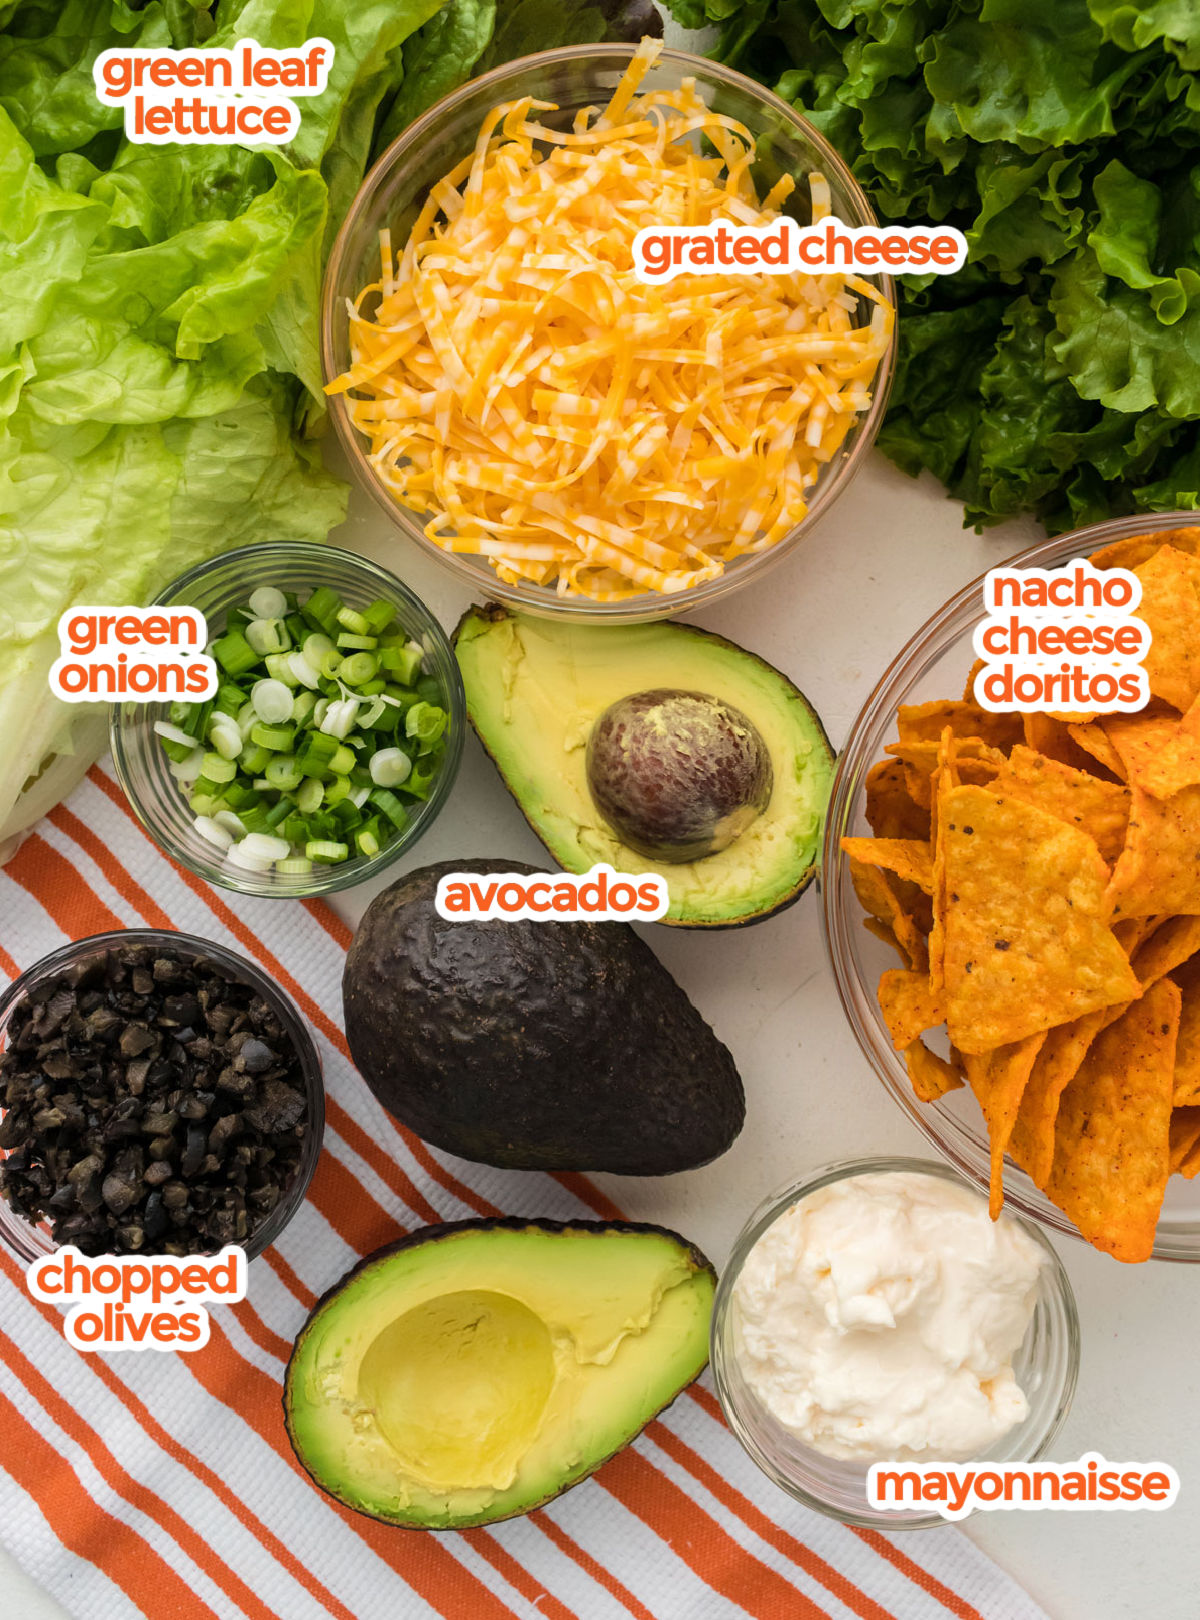 All the ingredients you will need to make Dorito Taco Salad including Green Leaf lettuce, Nacho Cheese Doritos, Avocados, Green Onions, Cheese, Chopped Olives and Mayonnaise.